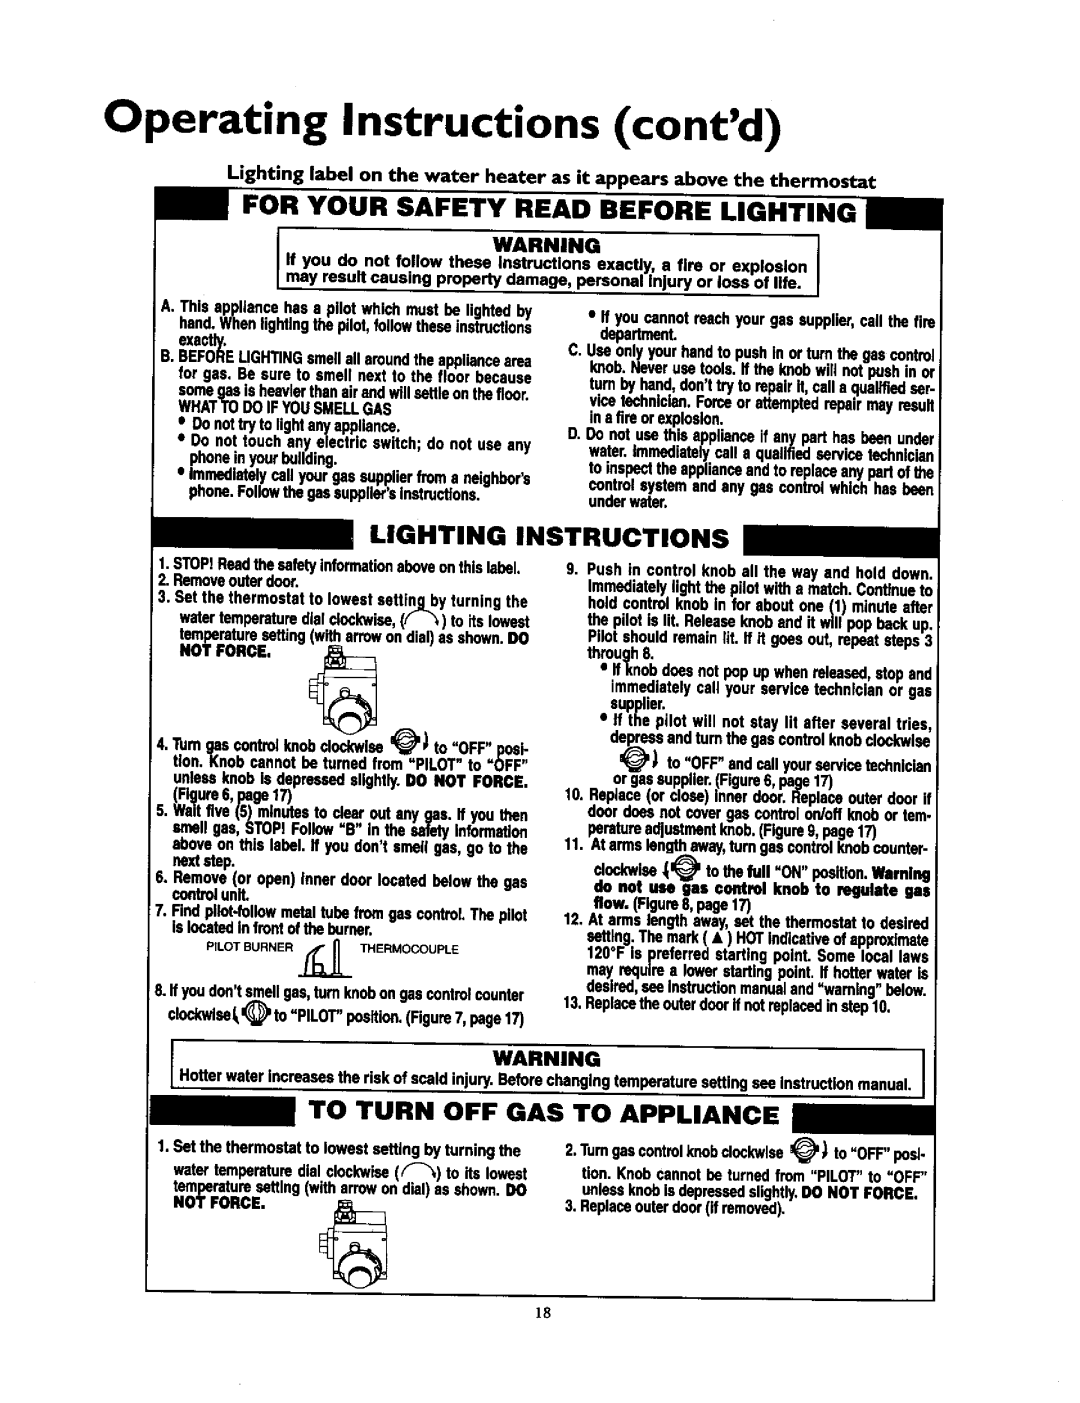 Kenmore 153.336851 Operating Instructions contd, For Your Safety Read Before Lighting, Lighting Instructions, Not Force 